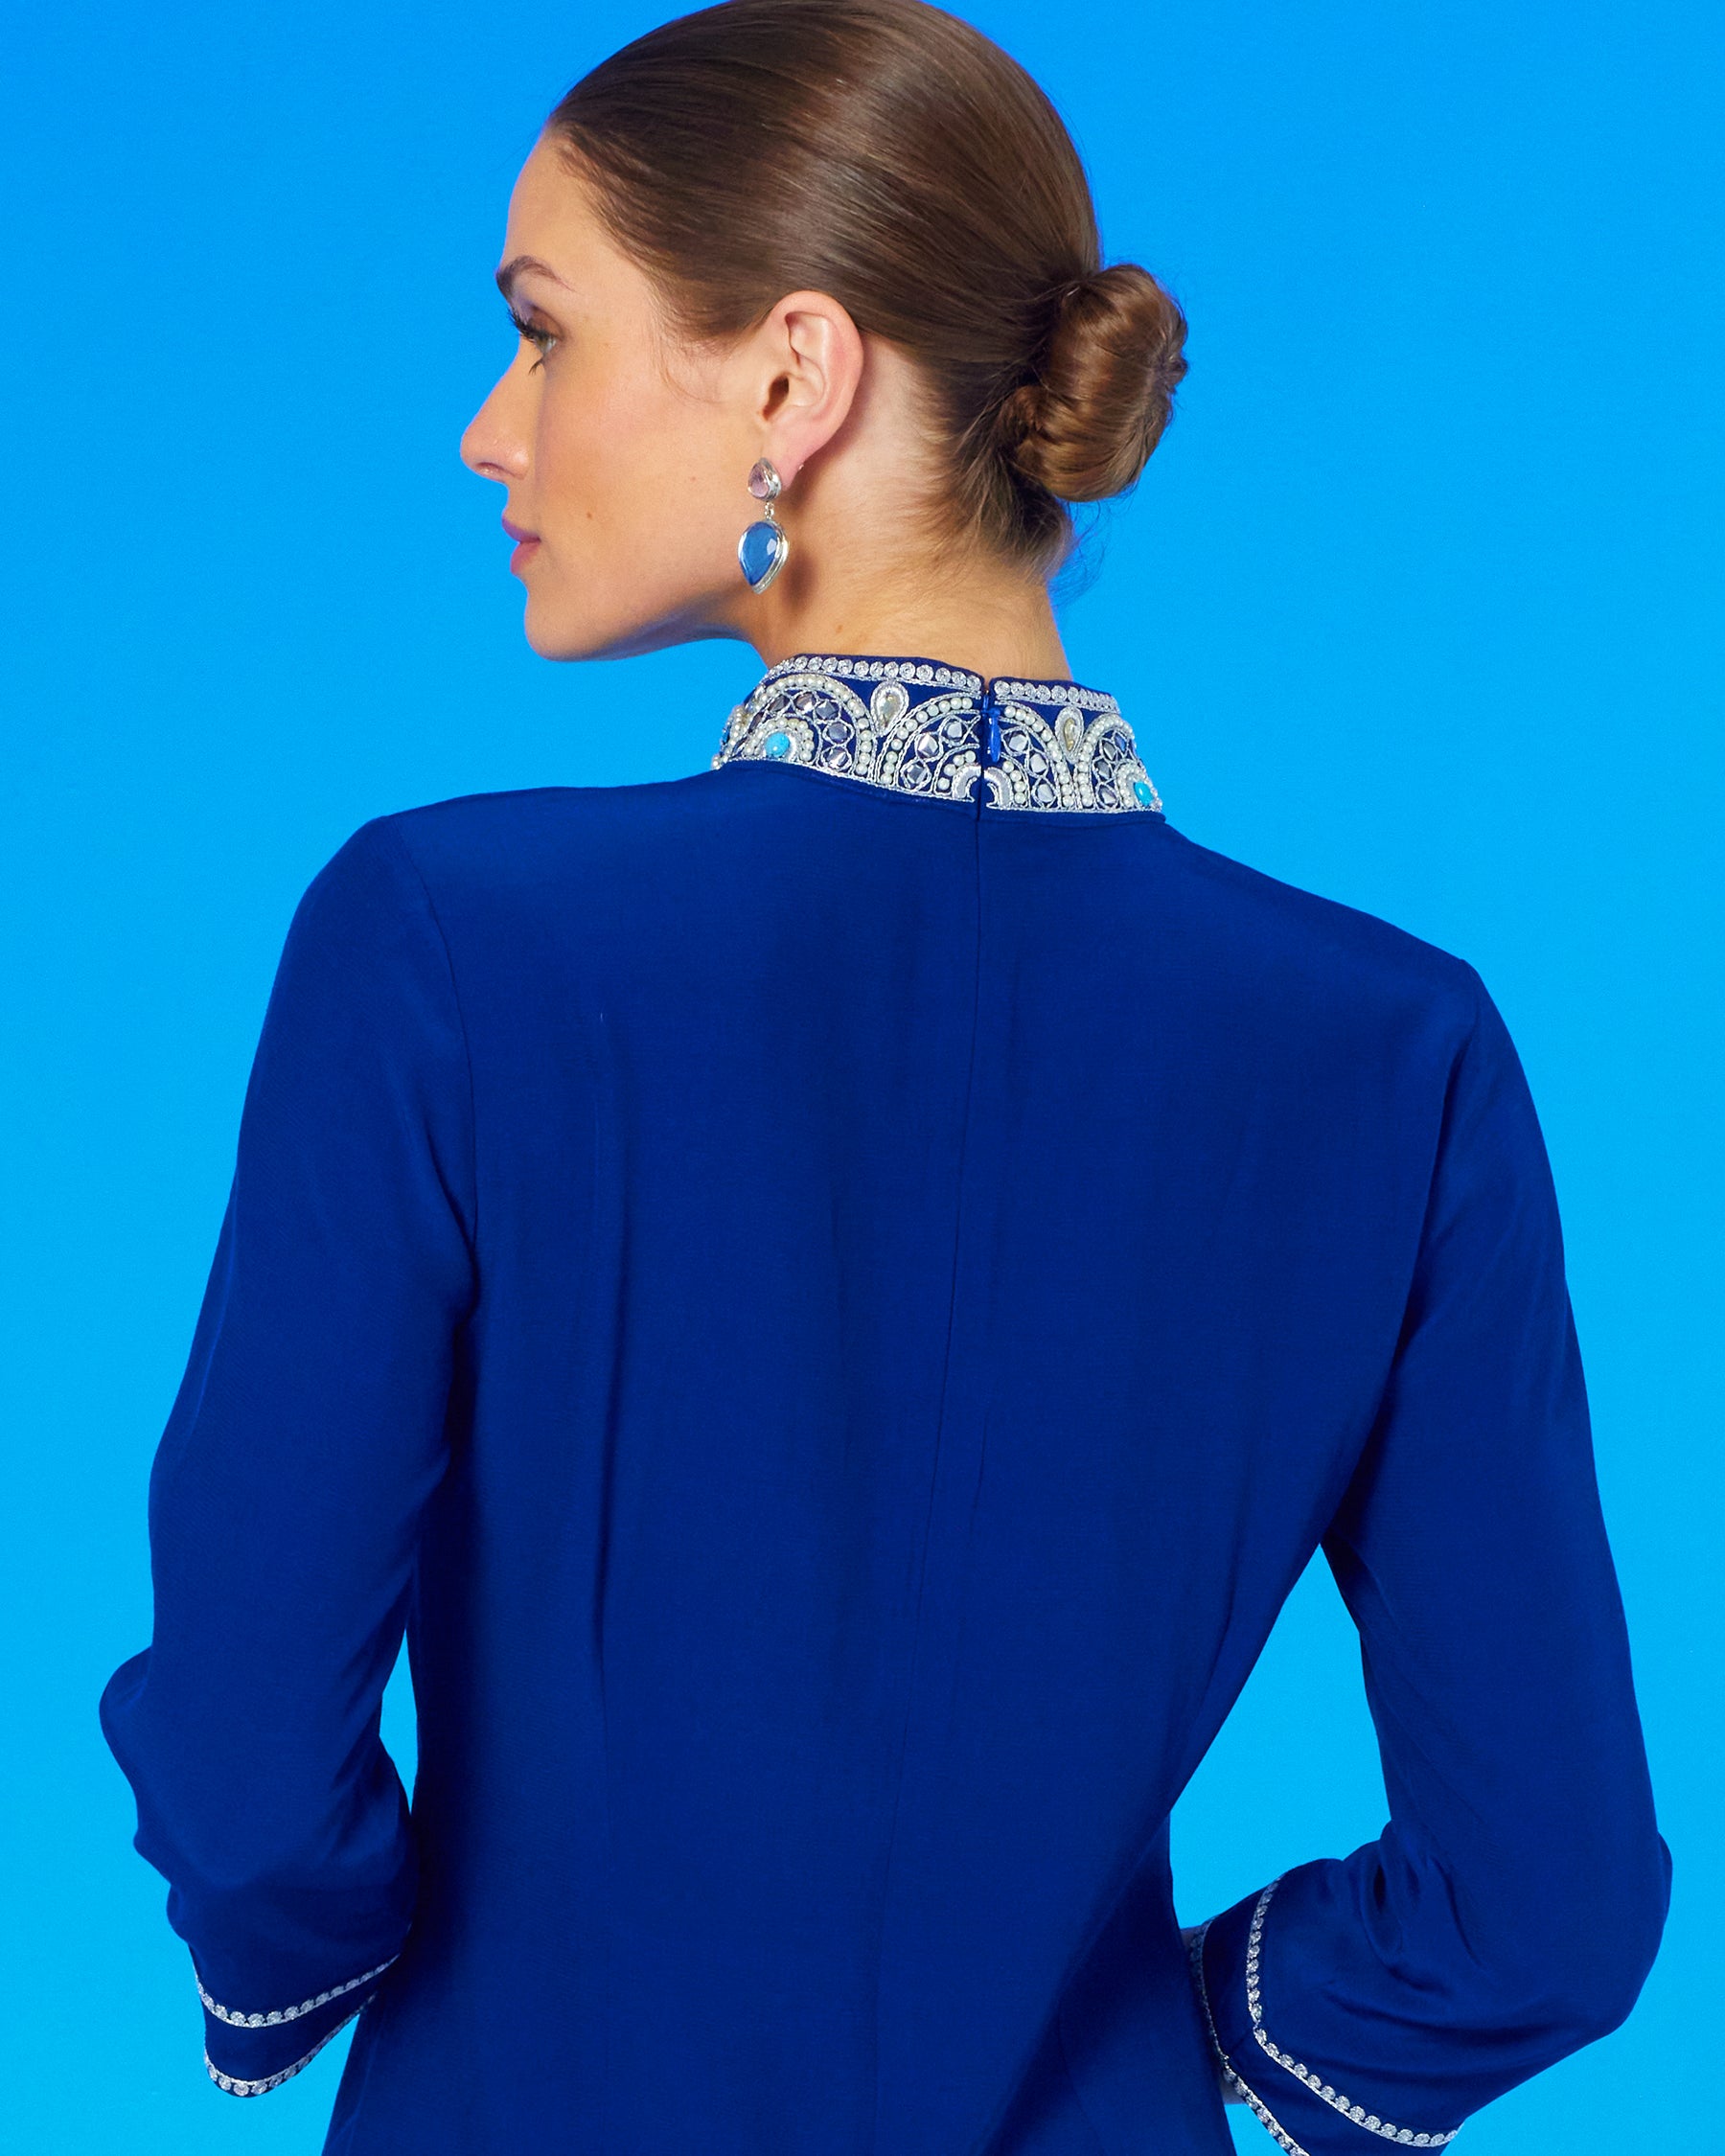 Noor Long Navy Tunic Dress with Silver Embellishment back view showing embellished detail on the back collar